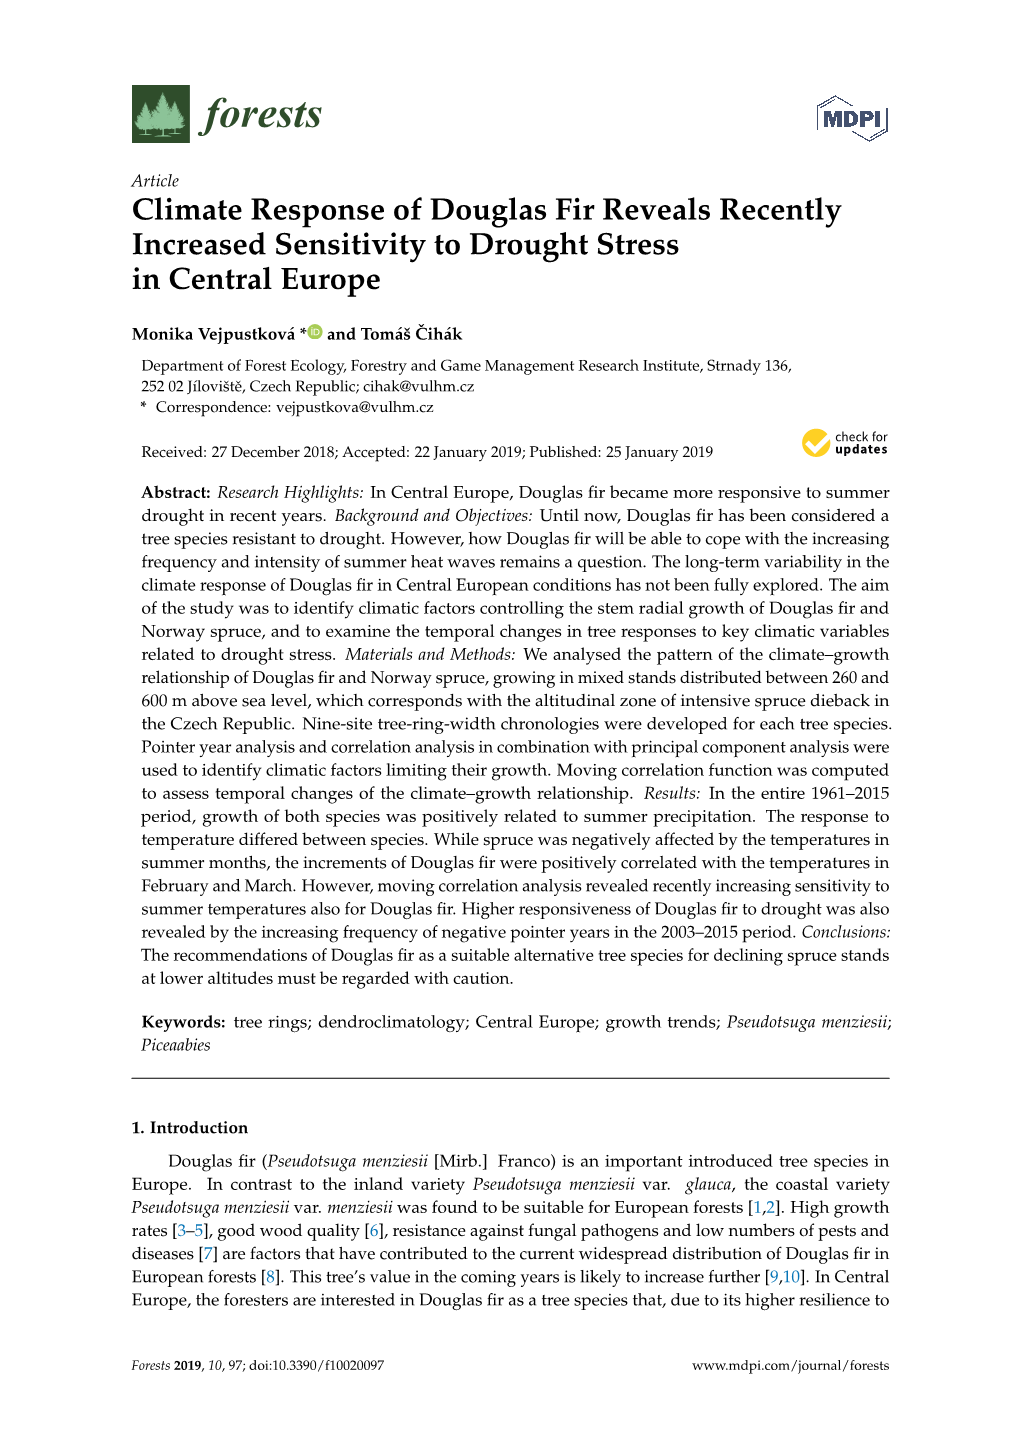 Climate Response of Douglas Fir Reveals Recently Increased Sensitivity to Drought Stress in Central Europe